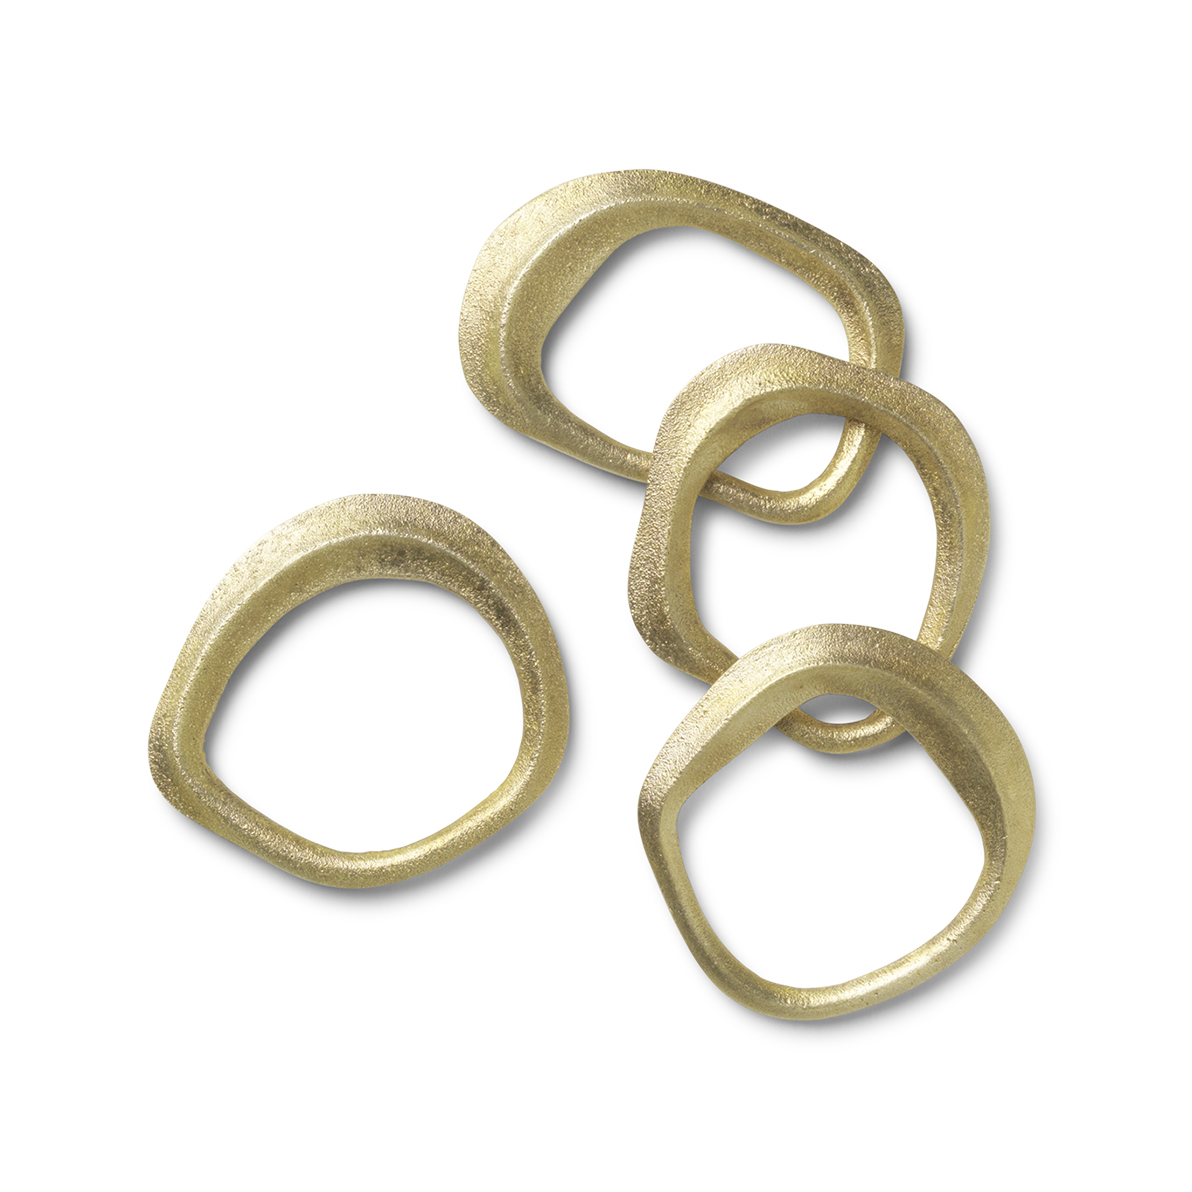 Flow napkin ring 4-pack from Ferm LIVING - NordicNest.com